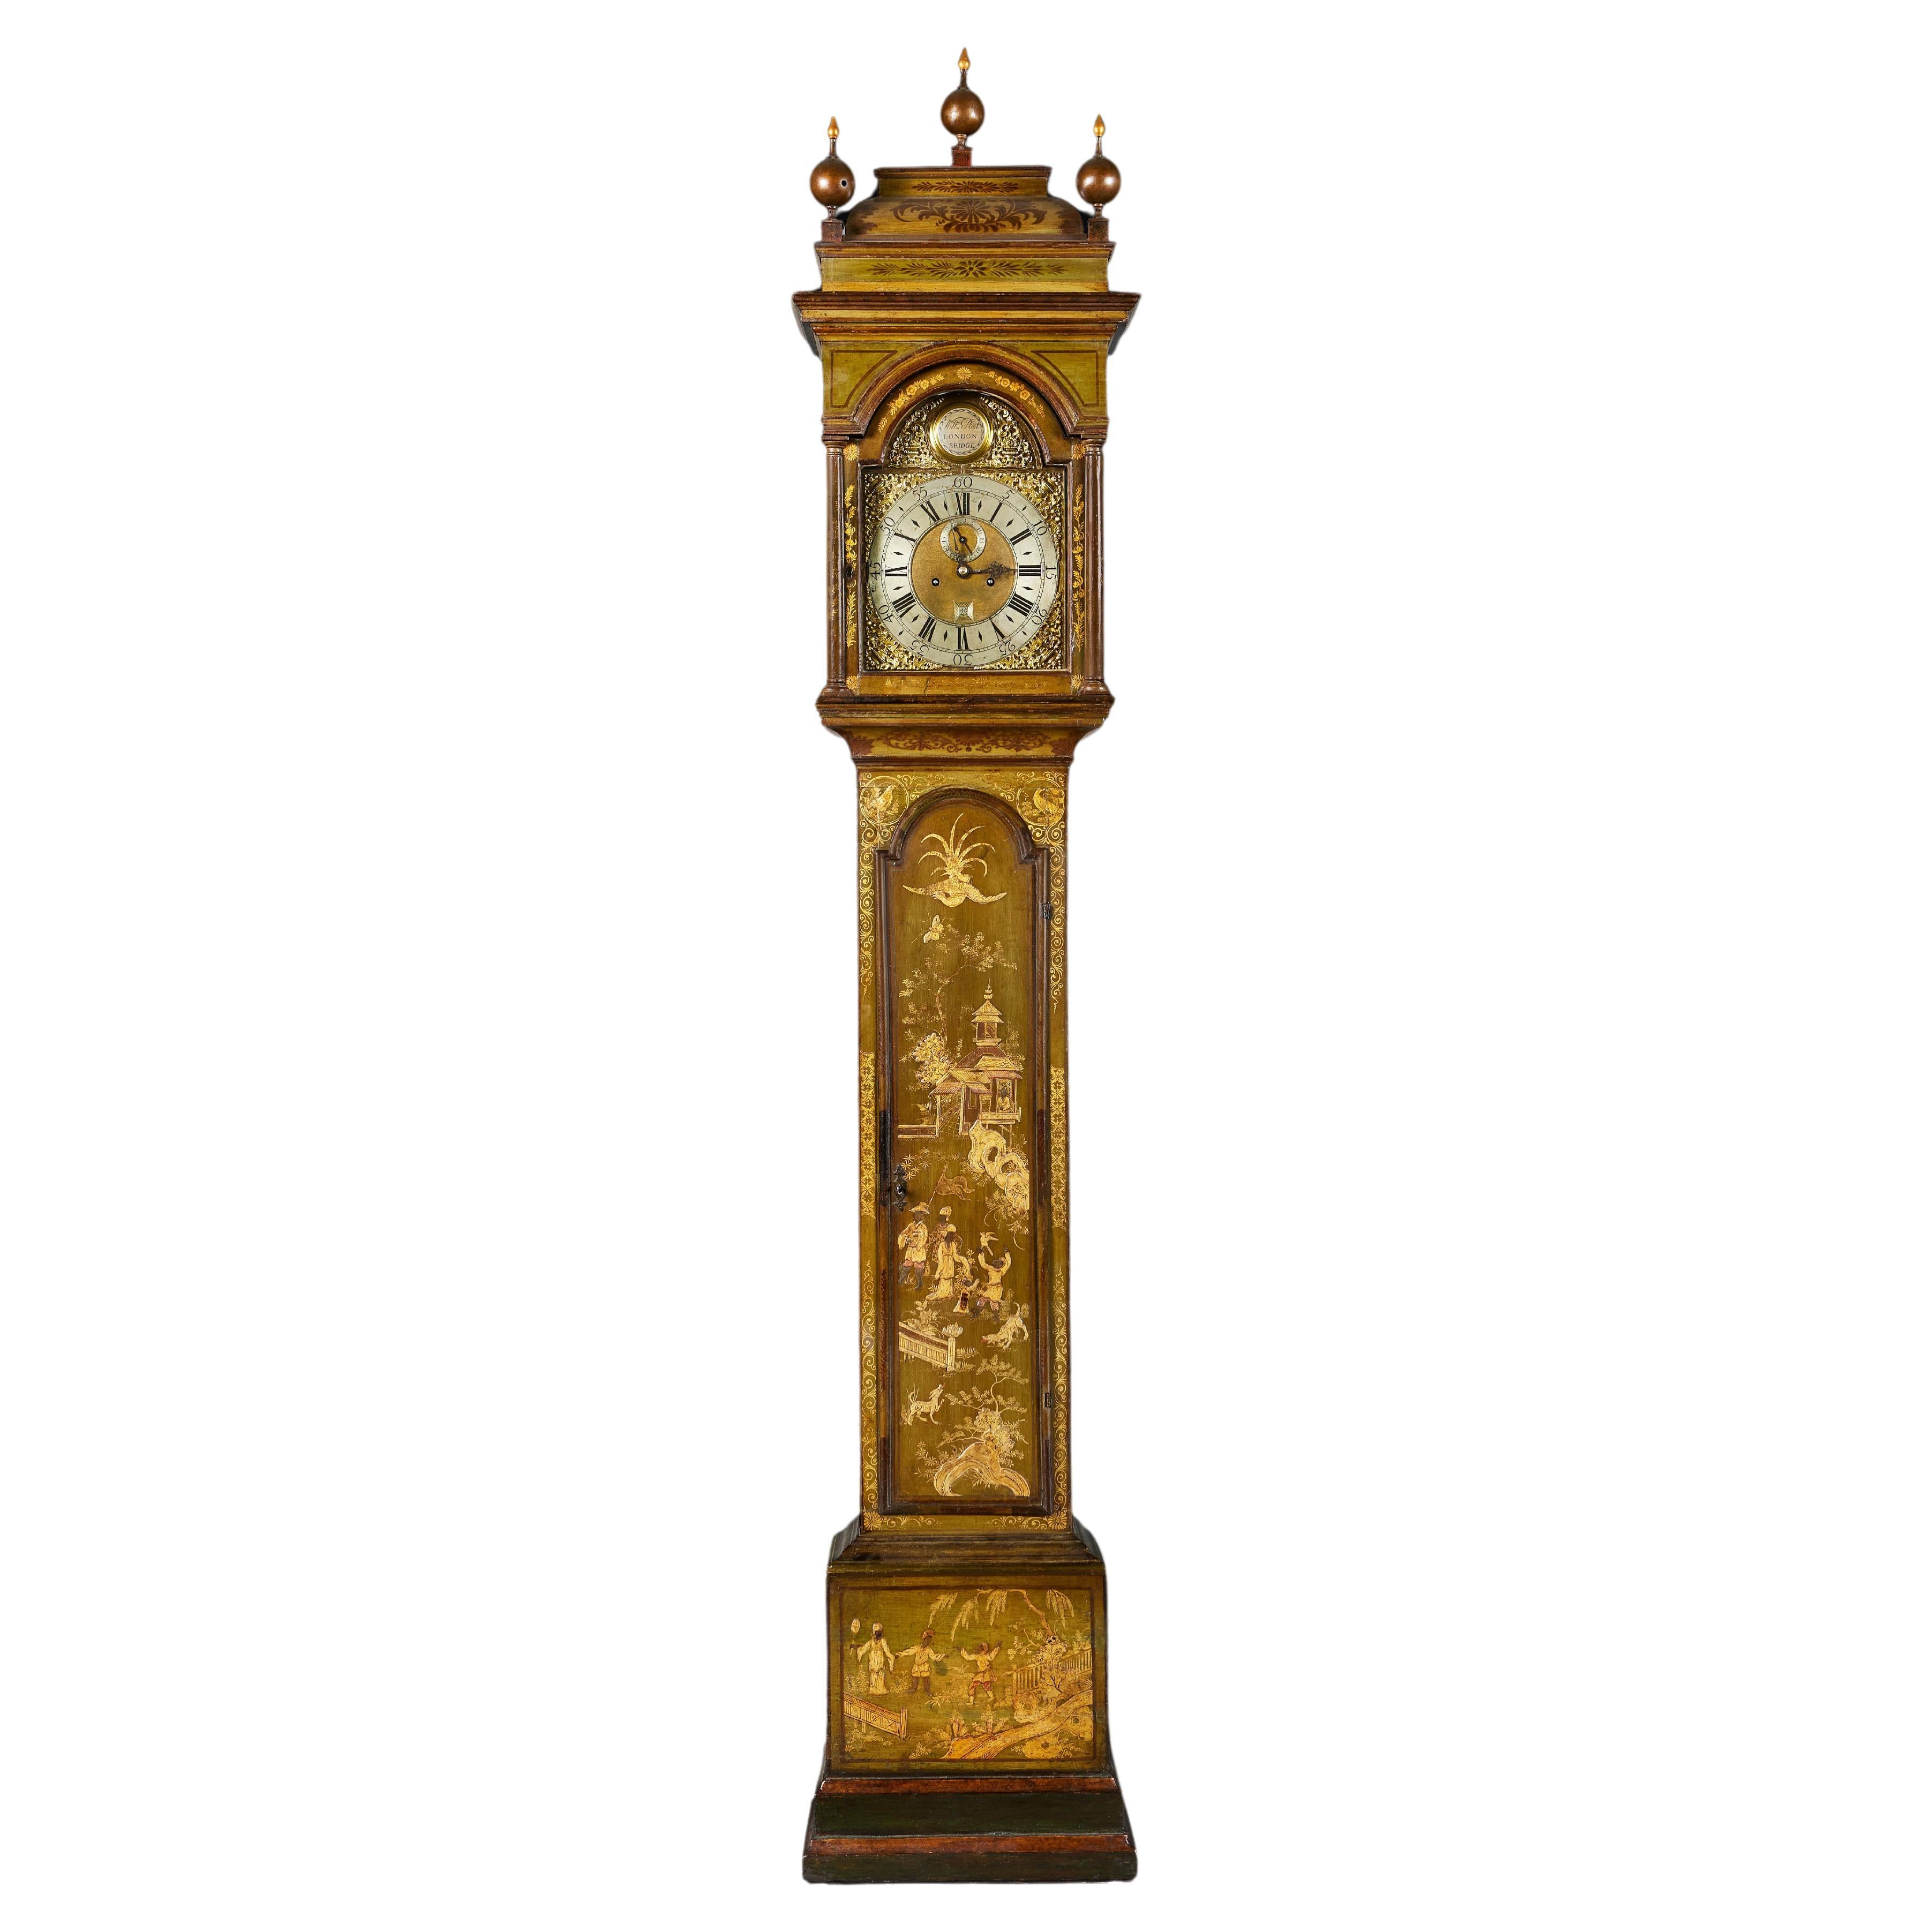 An 18th Century Green Japanned Lacquer Longcase Clock